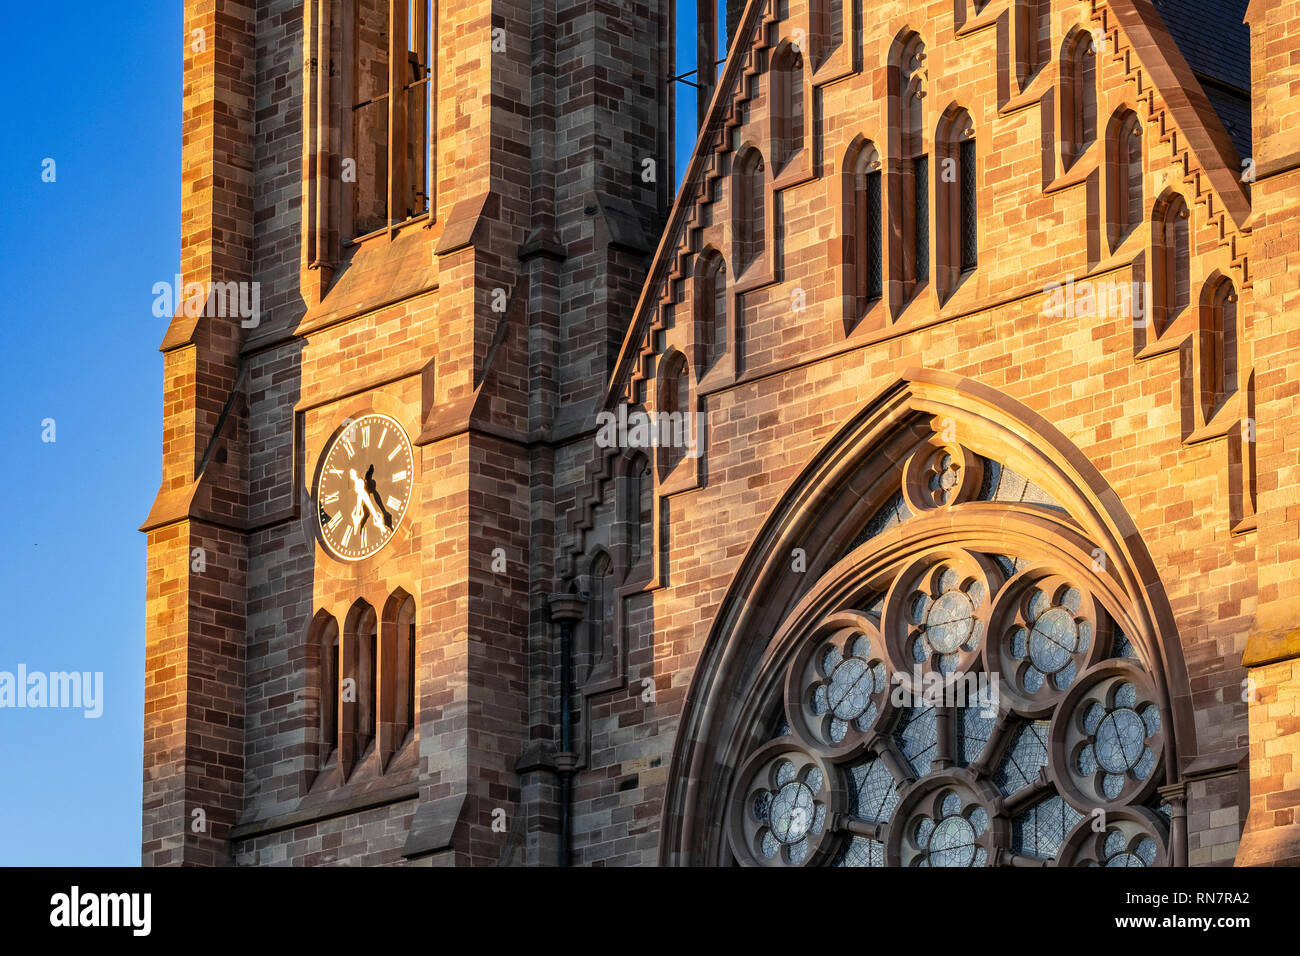 Strasbourg, Alsace, France, St Paul protestant church, Neustadt district, late afternoon light, Stock Photo